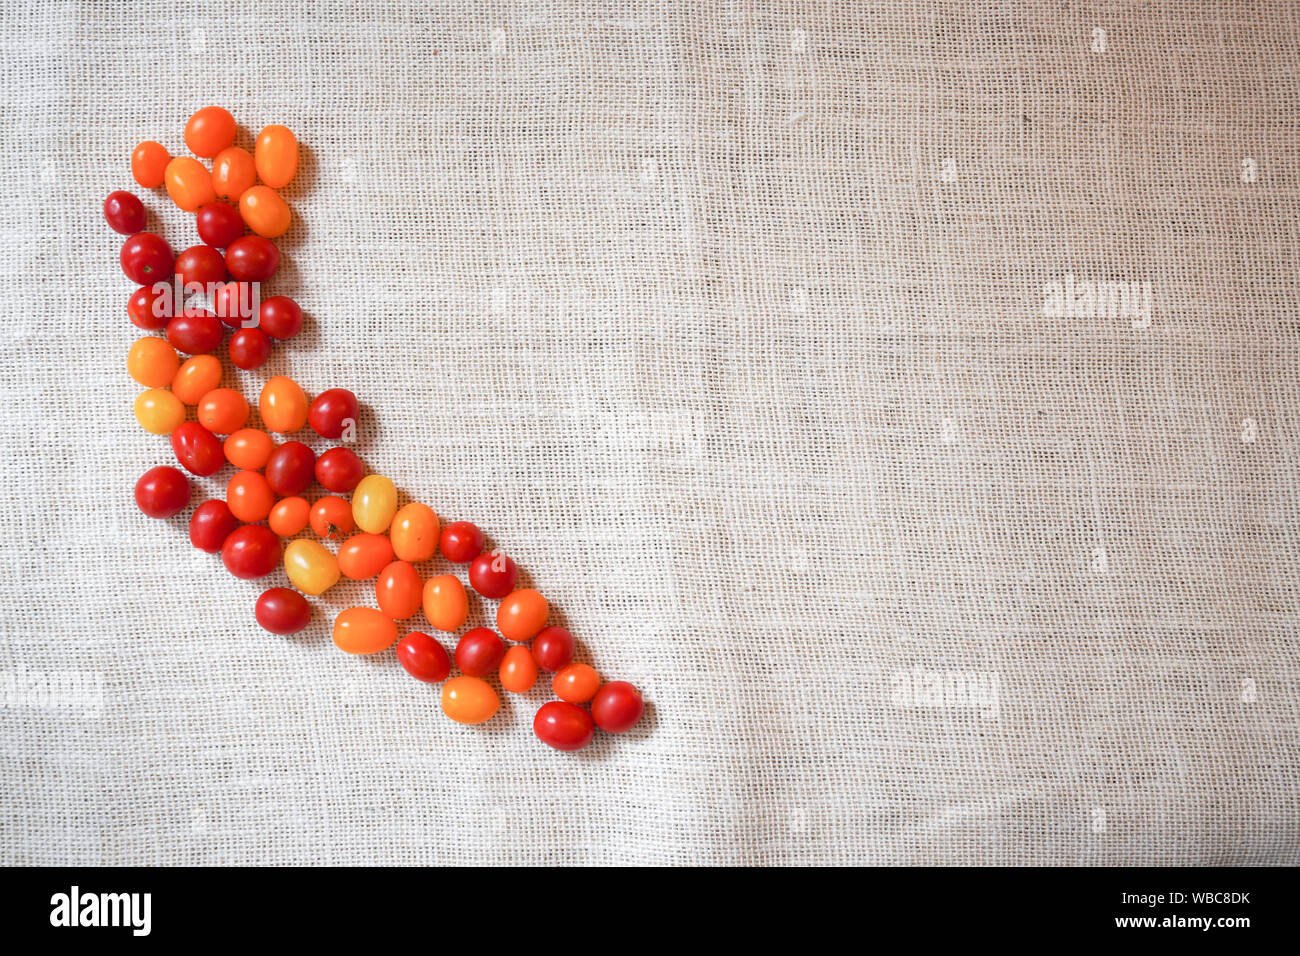 A pile of cherry tomatoes in the shape of California harvested from the garden on a rustic burlap background Stock Photo